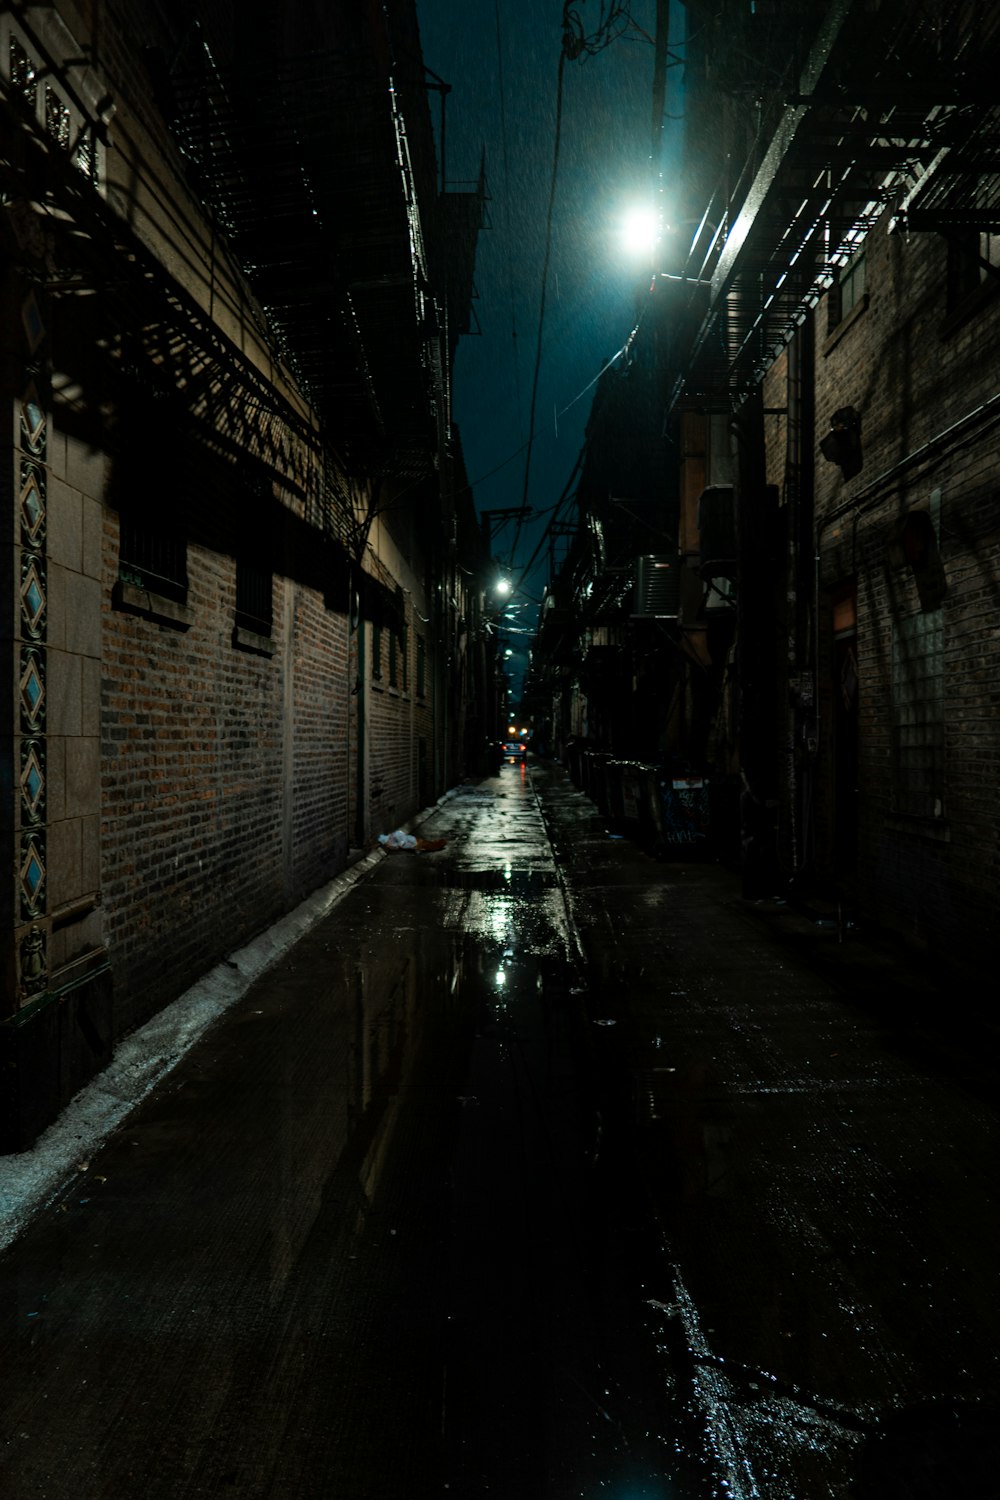 a dark alley way with a street light in the distance